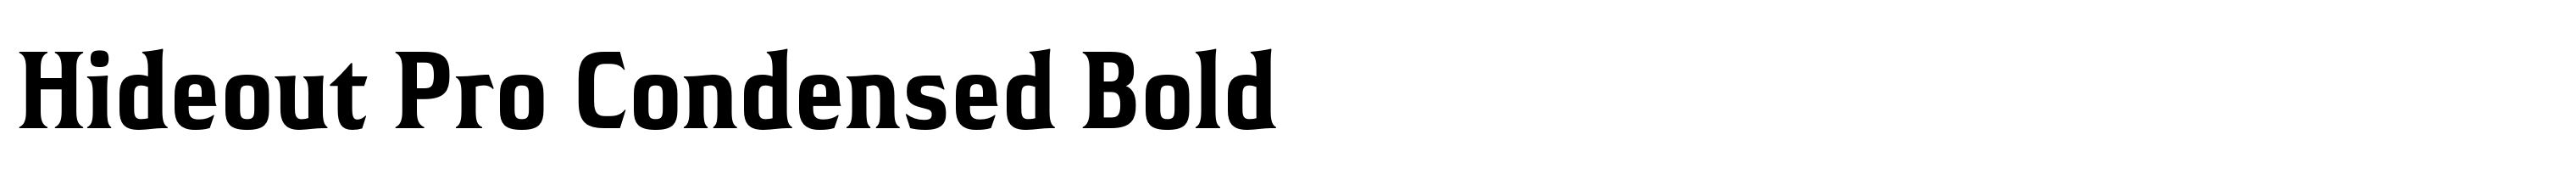 Hideout Pro Condensed Bold